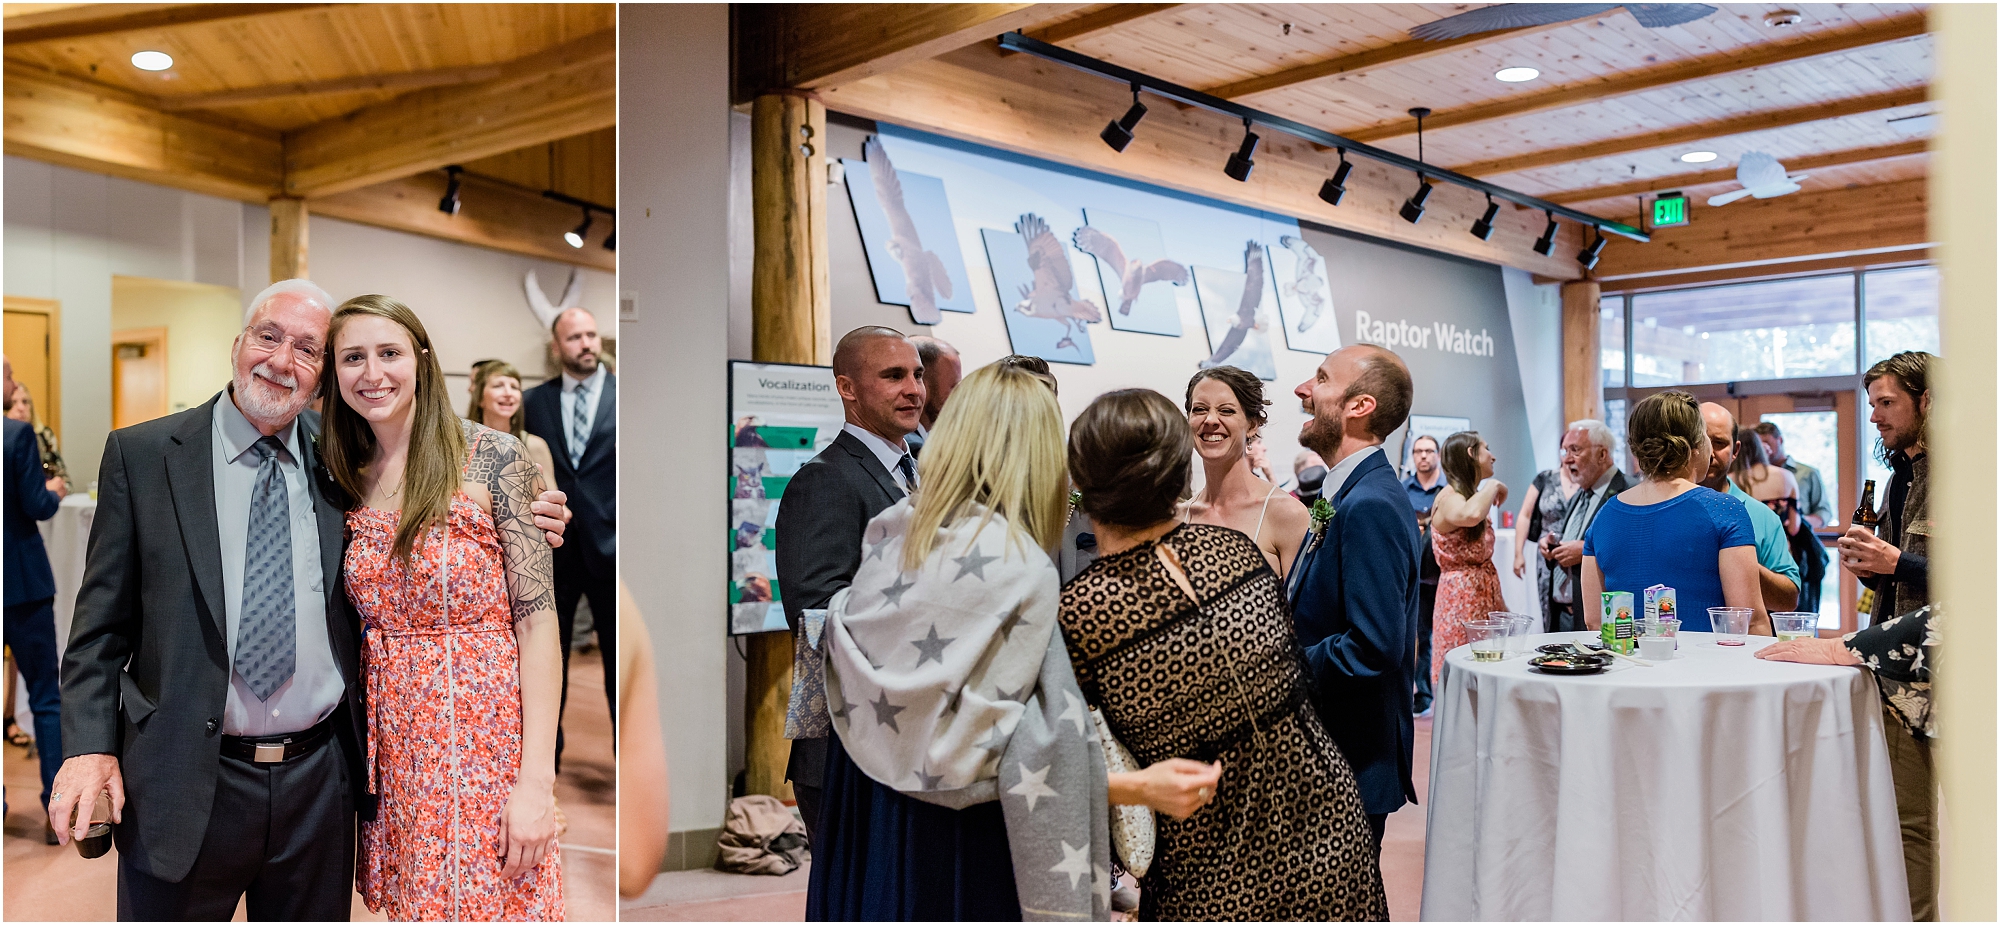 Wedding guests enjoy cocktail hour at the Birds of Prey exhibit at the High Desert Museum wedding venue in Bend, OR. | Erica Swantek Photography